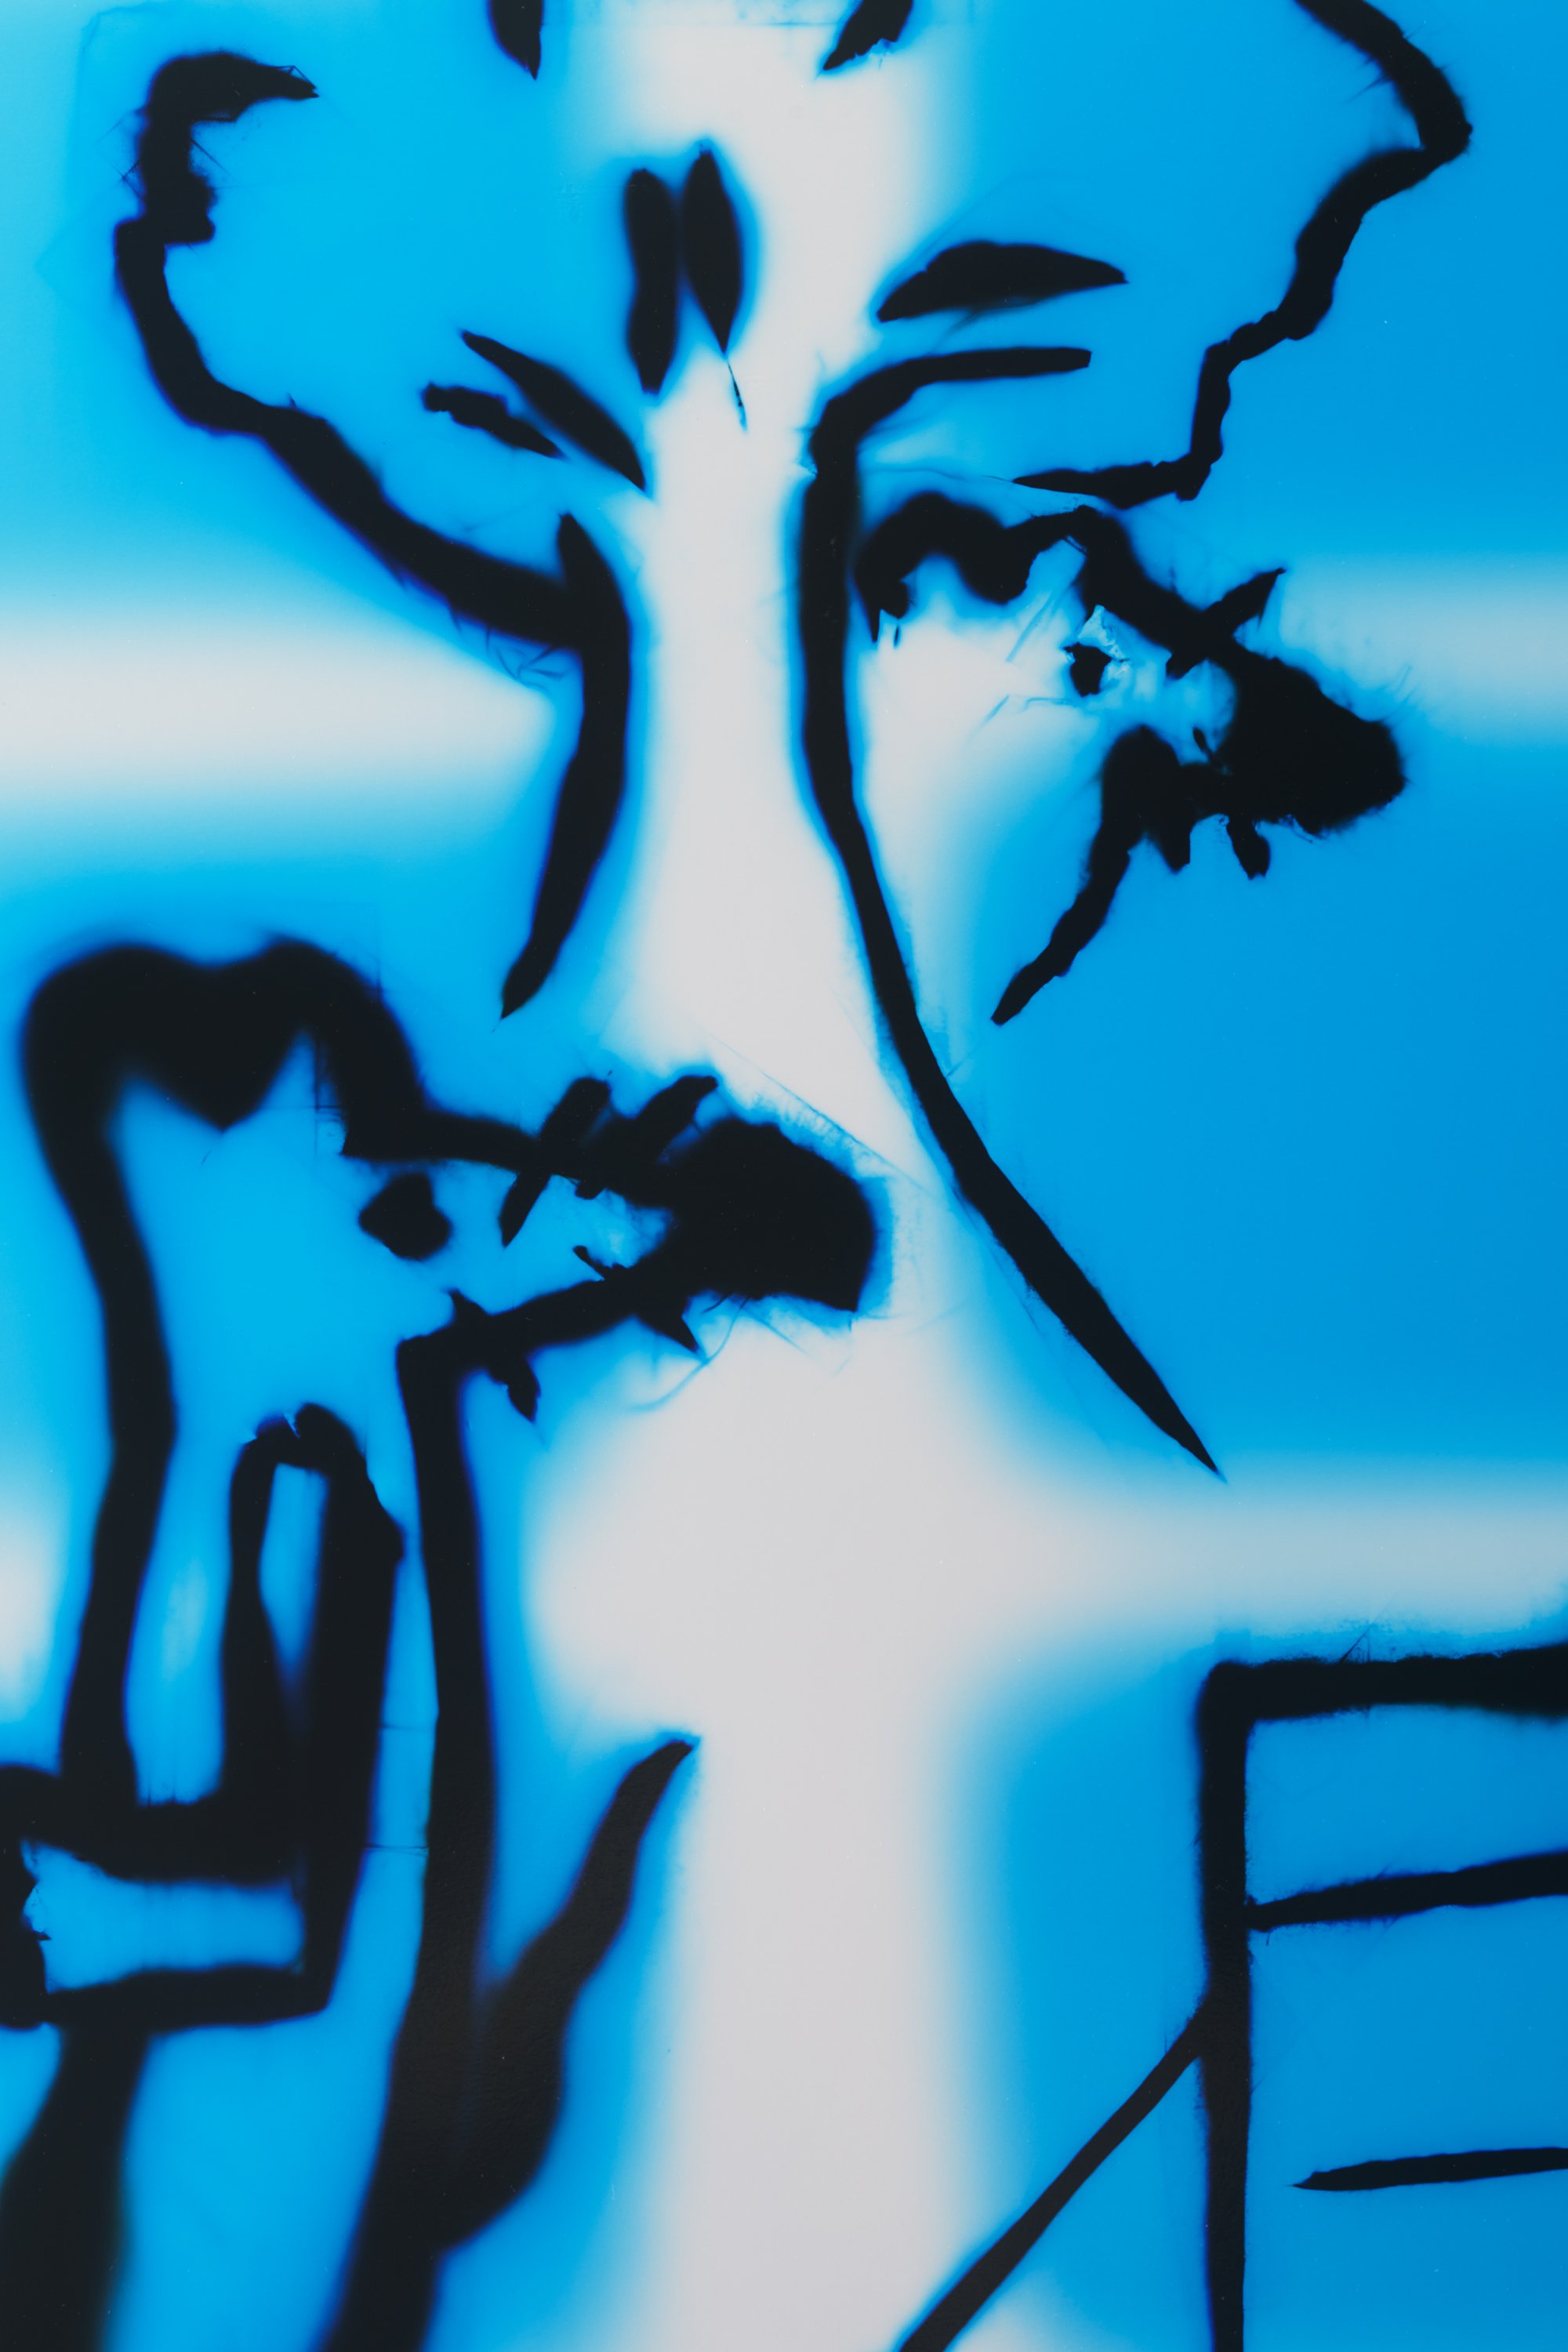 Hadi Fallahpisheh, Cat and Mouse talking about Dog, detail, light drawing on photosensitive paper112 x 205 x 5 cm (44 1/8 x 80 3/4 x 2 in), 2021